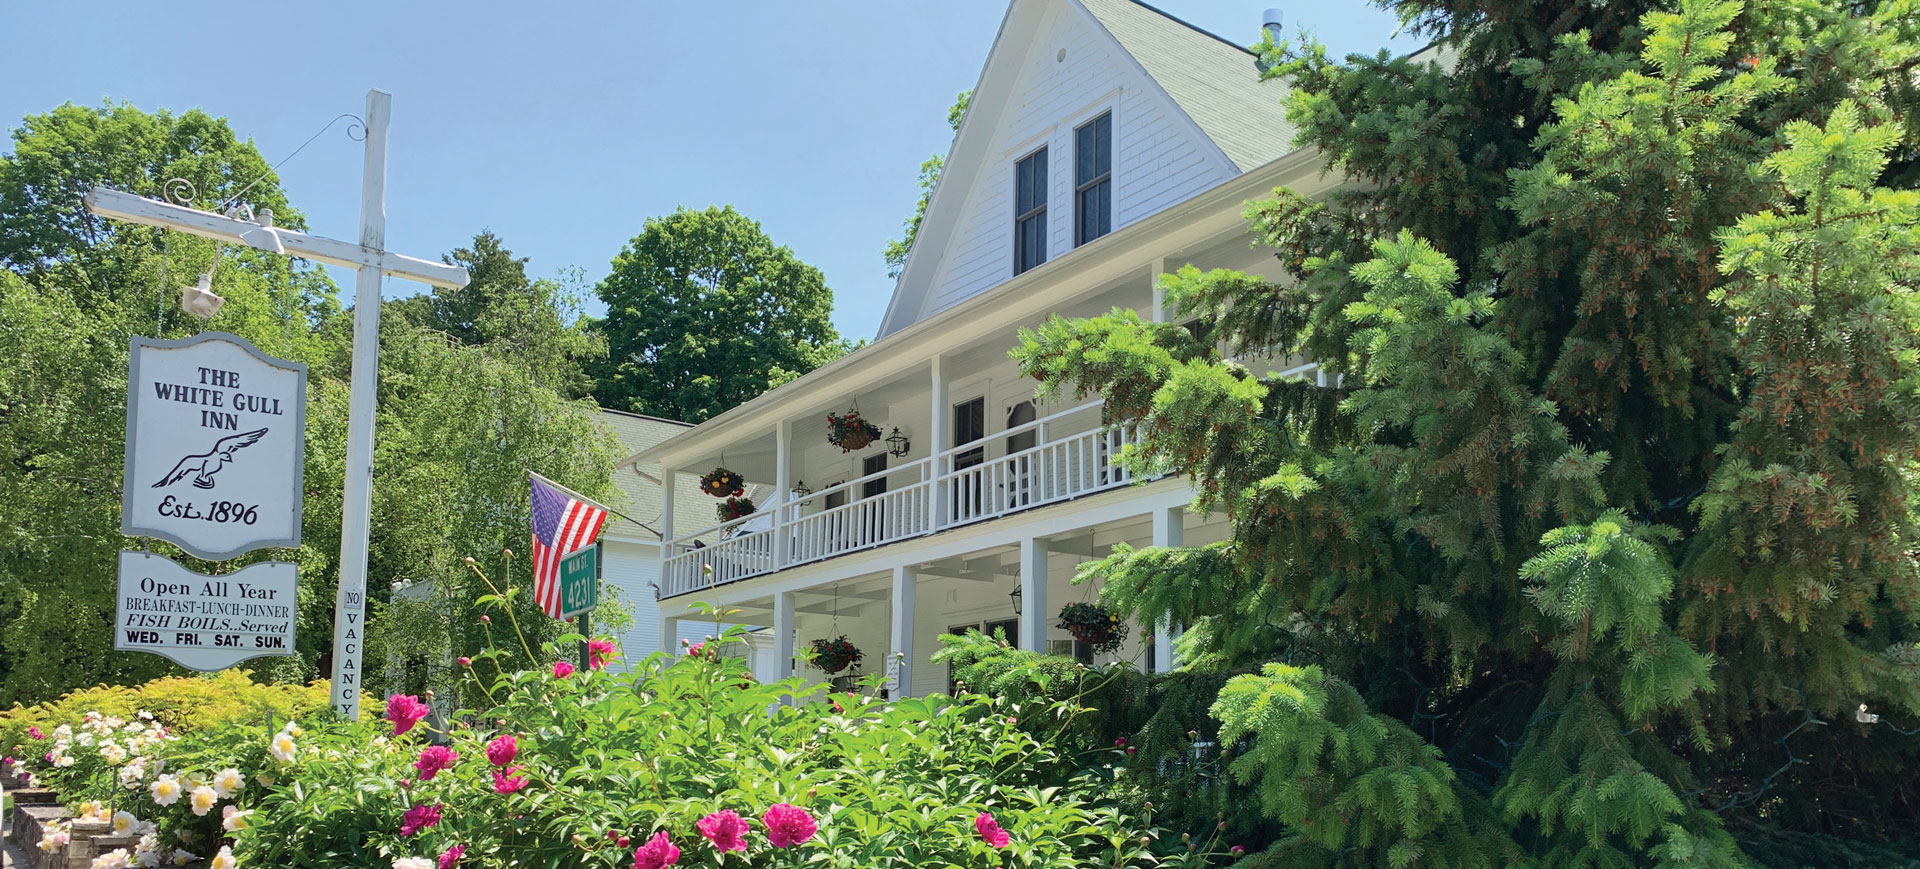 The White Gull Inn offers an authentic Lake Michigan getaway.